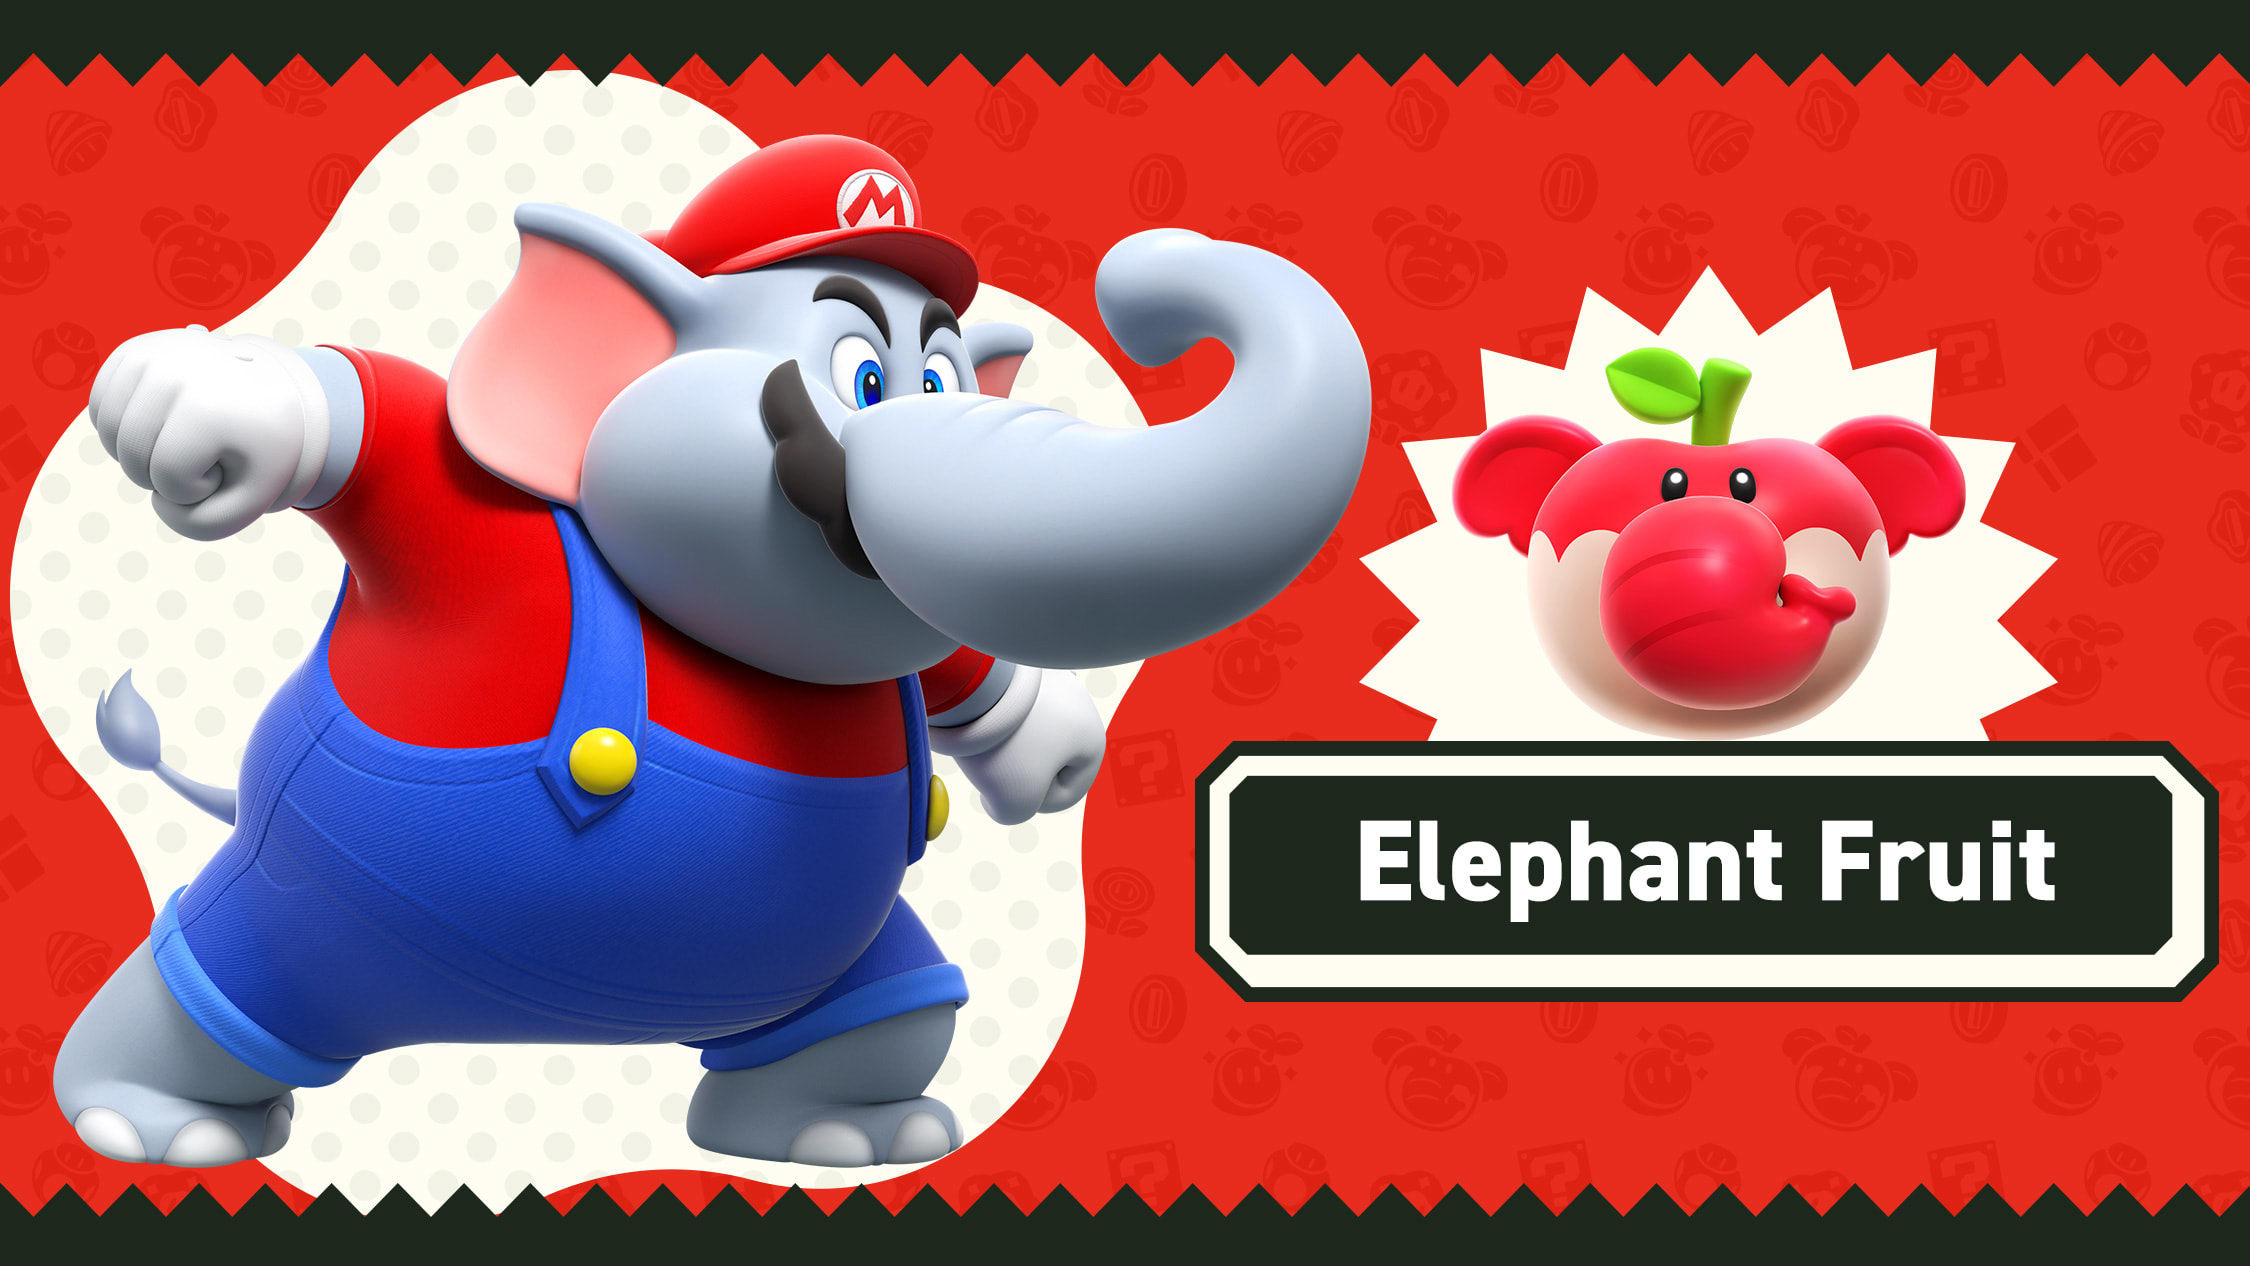 Get a jump on Super Mario Bros. Wonder with these powerful power-ups - Elephant